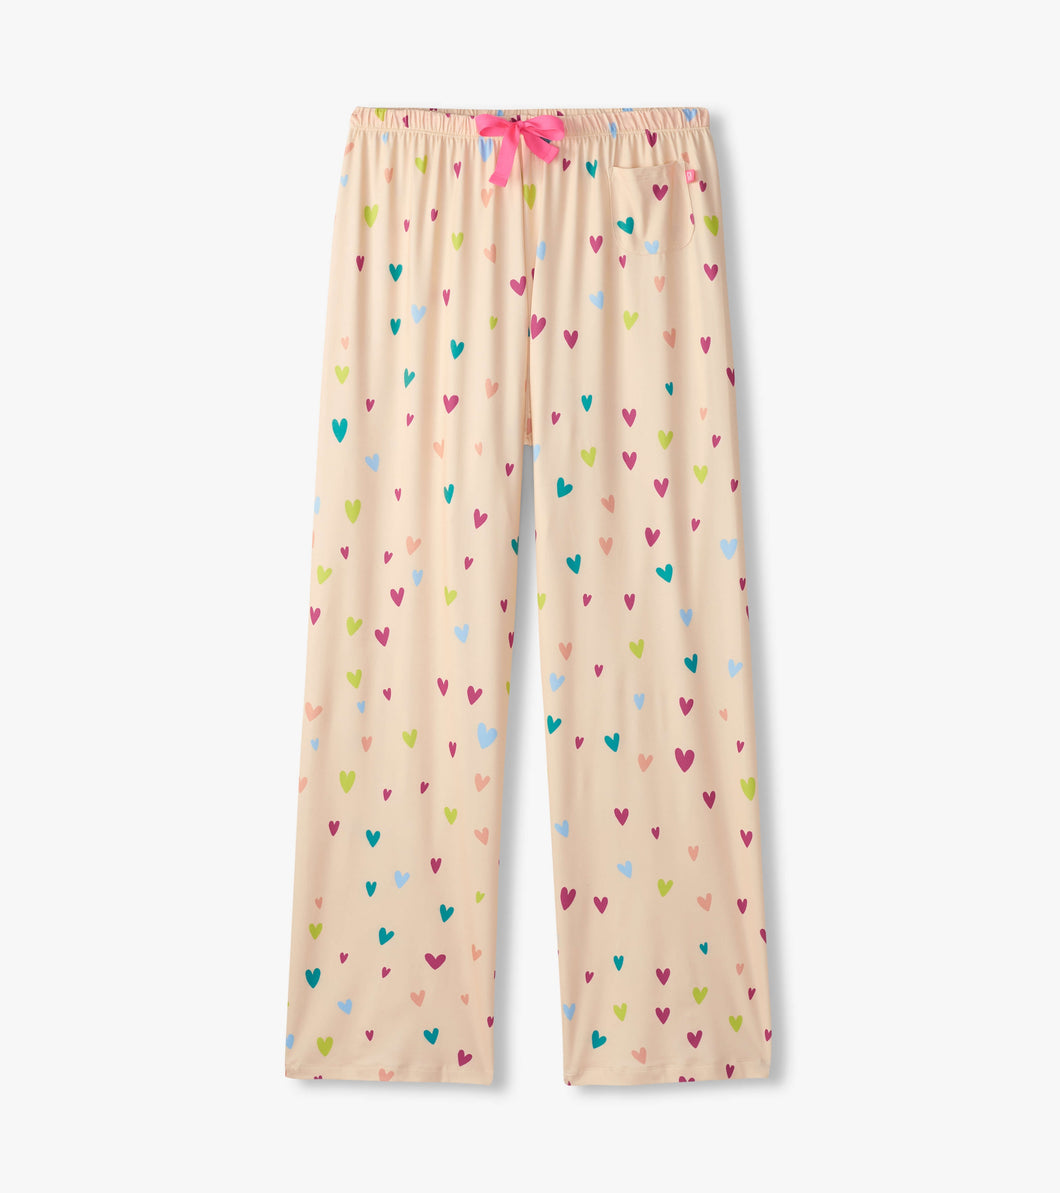 Pants In A Bag PJ - Jelly Bean Hearts